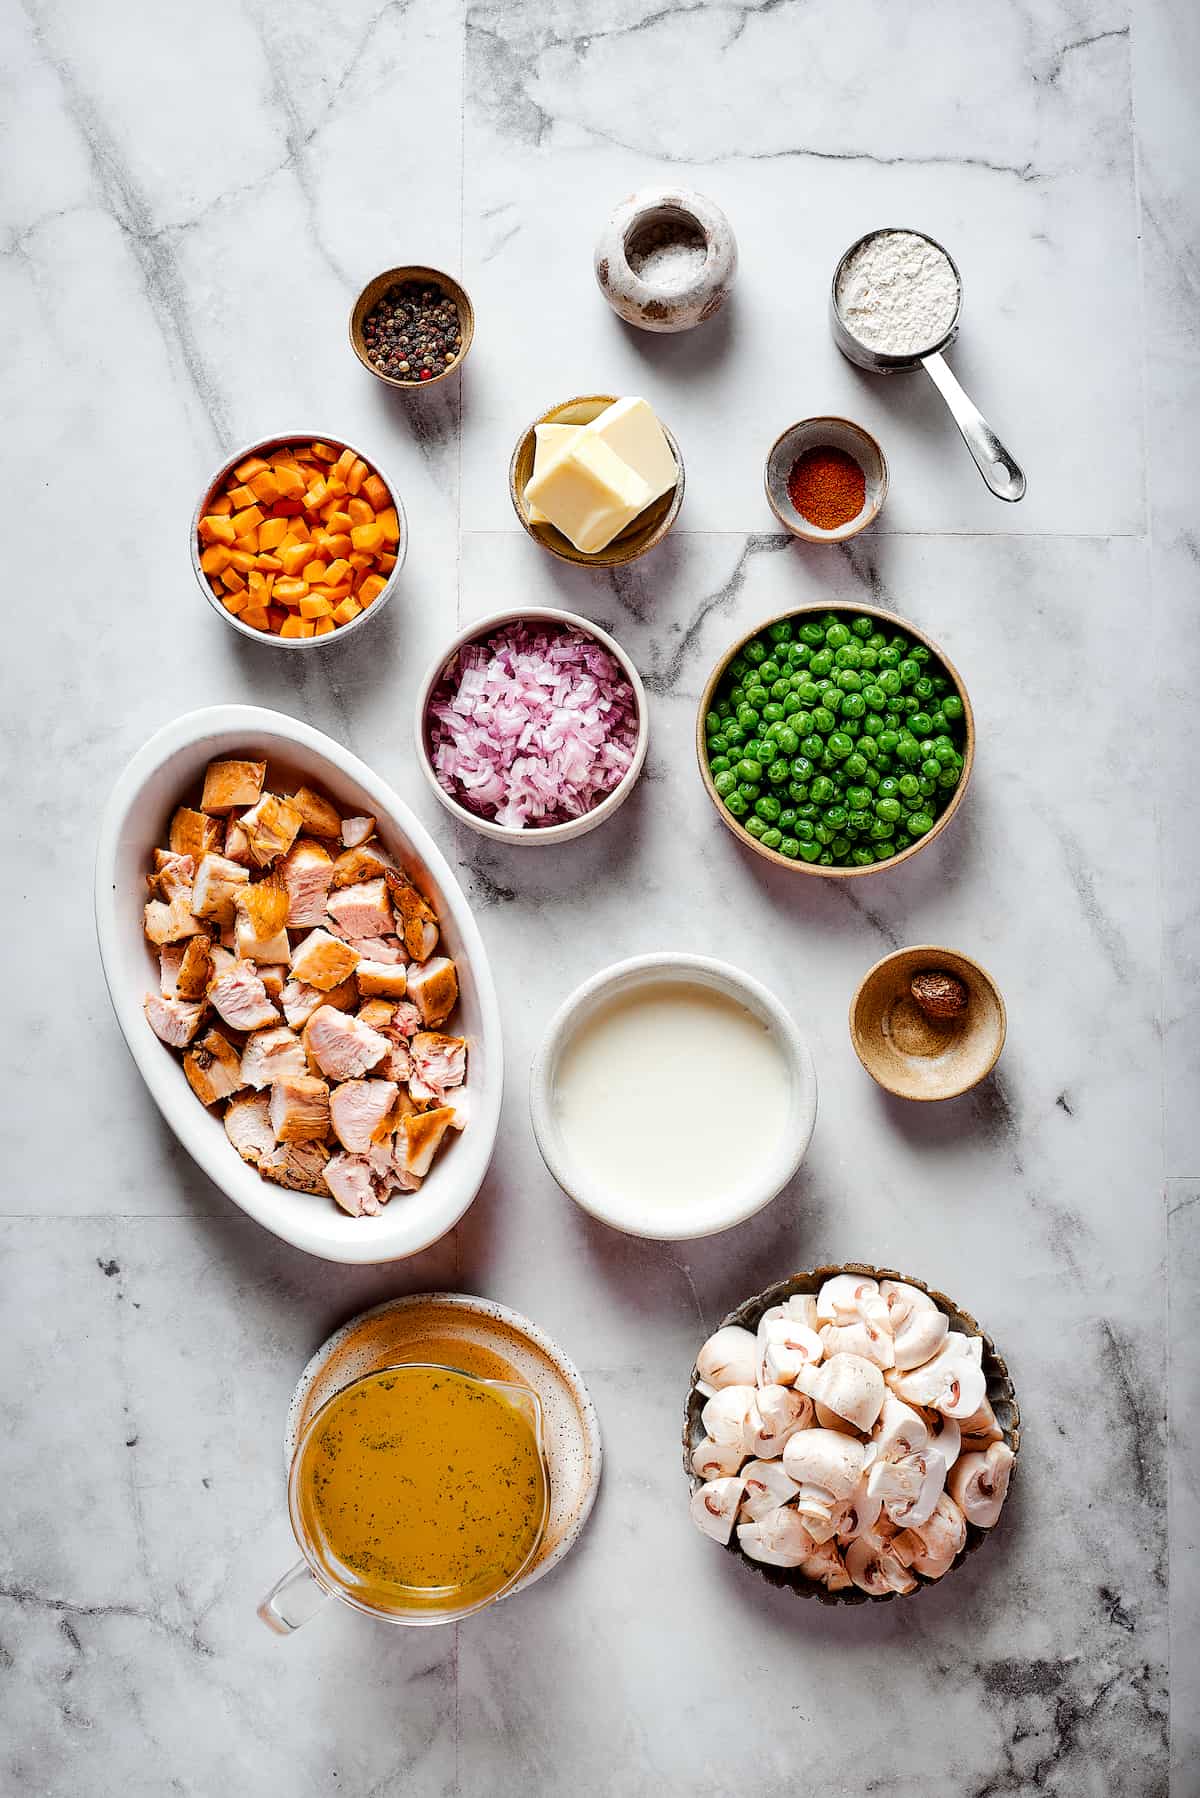 The ingredients for Turkey a La King are shown portioned out: on a white background: peas, turkey, butter, carrots, salt, pepper, paprika, and mushrooms.